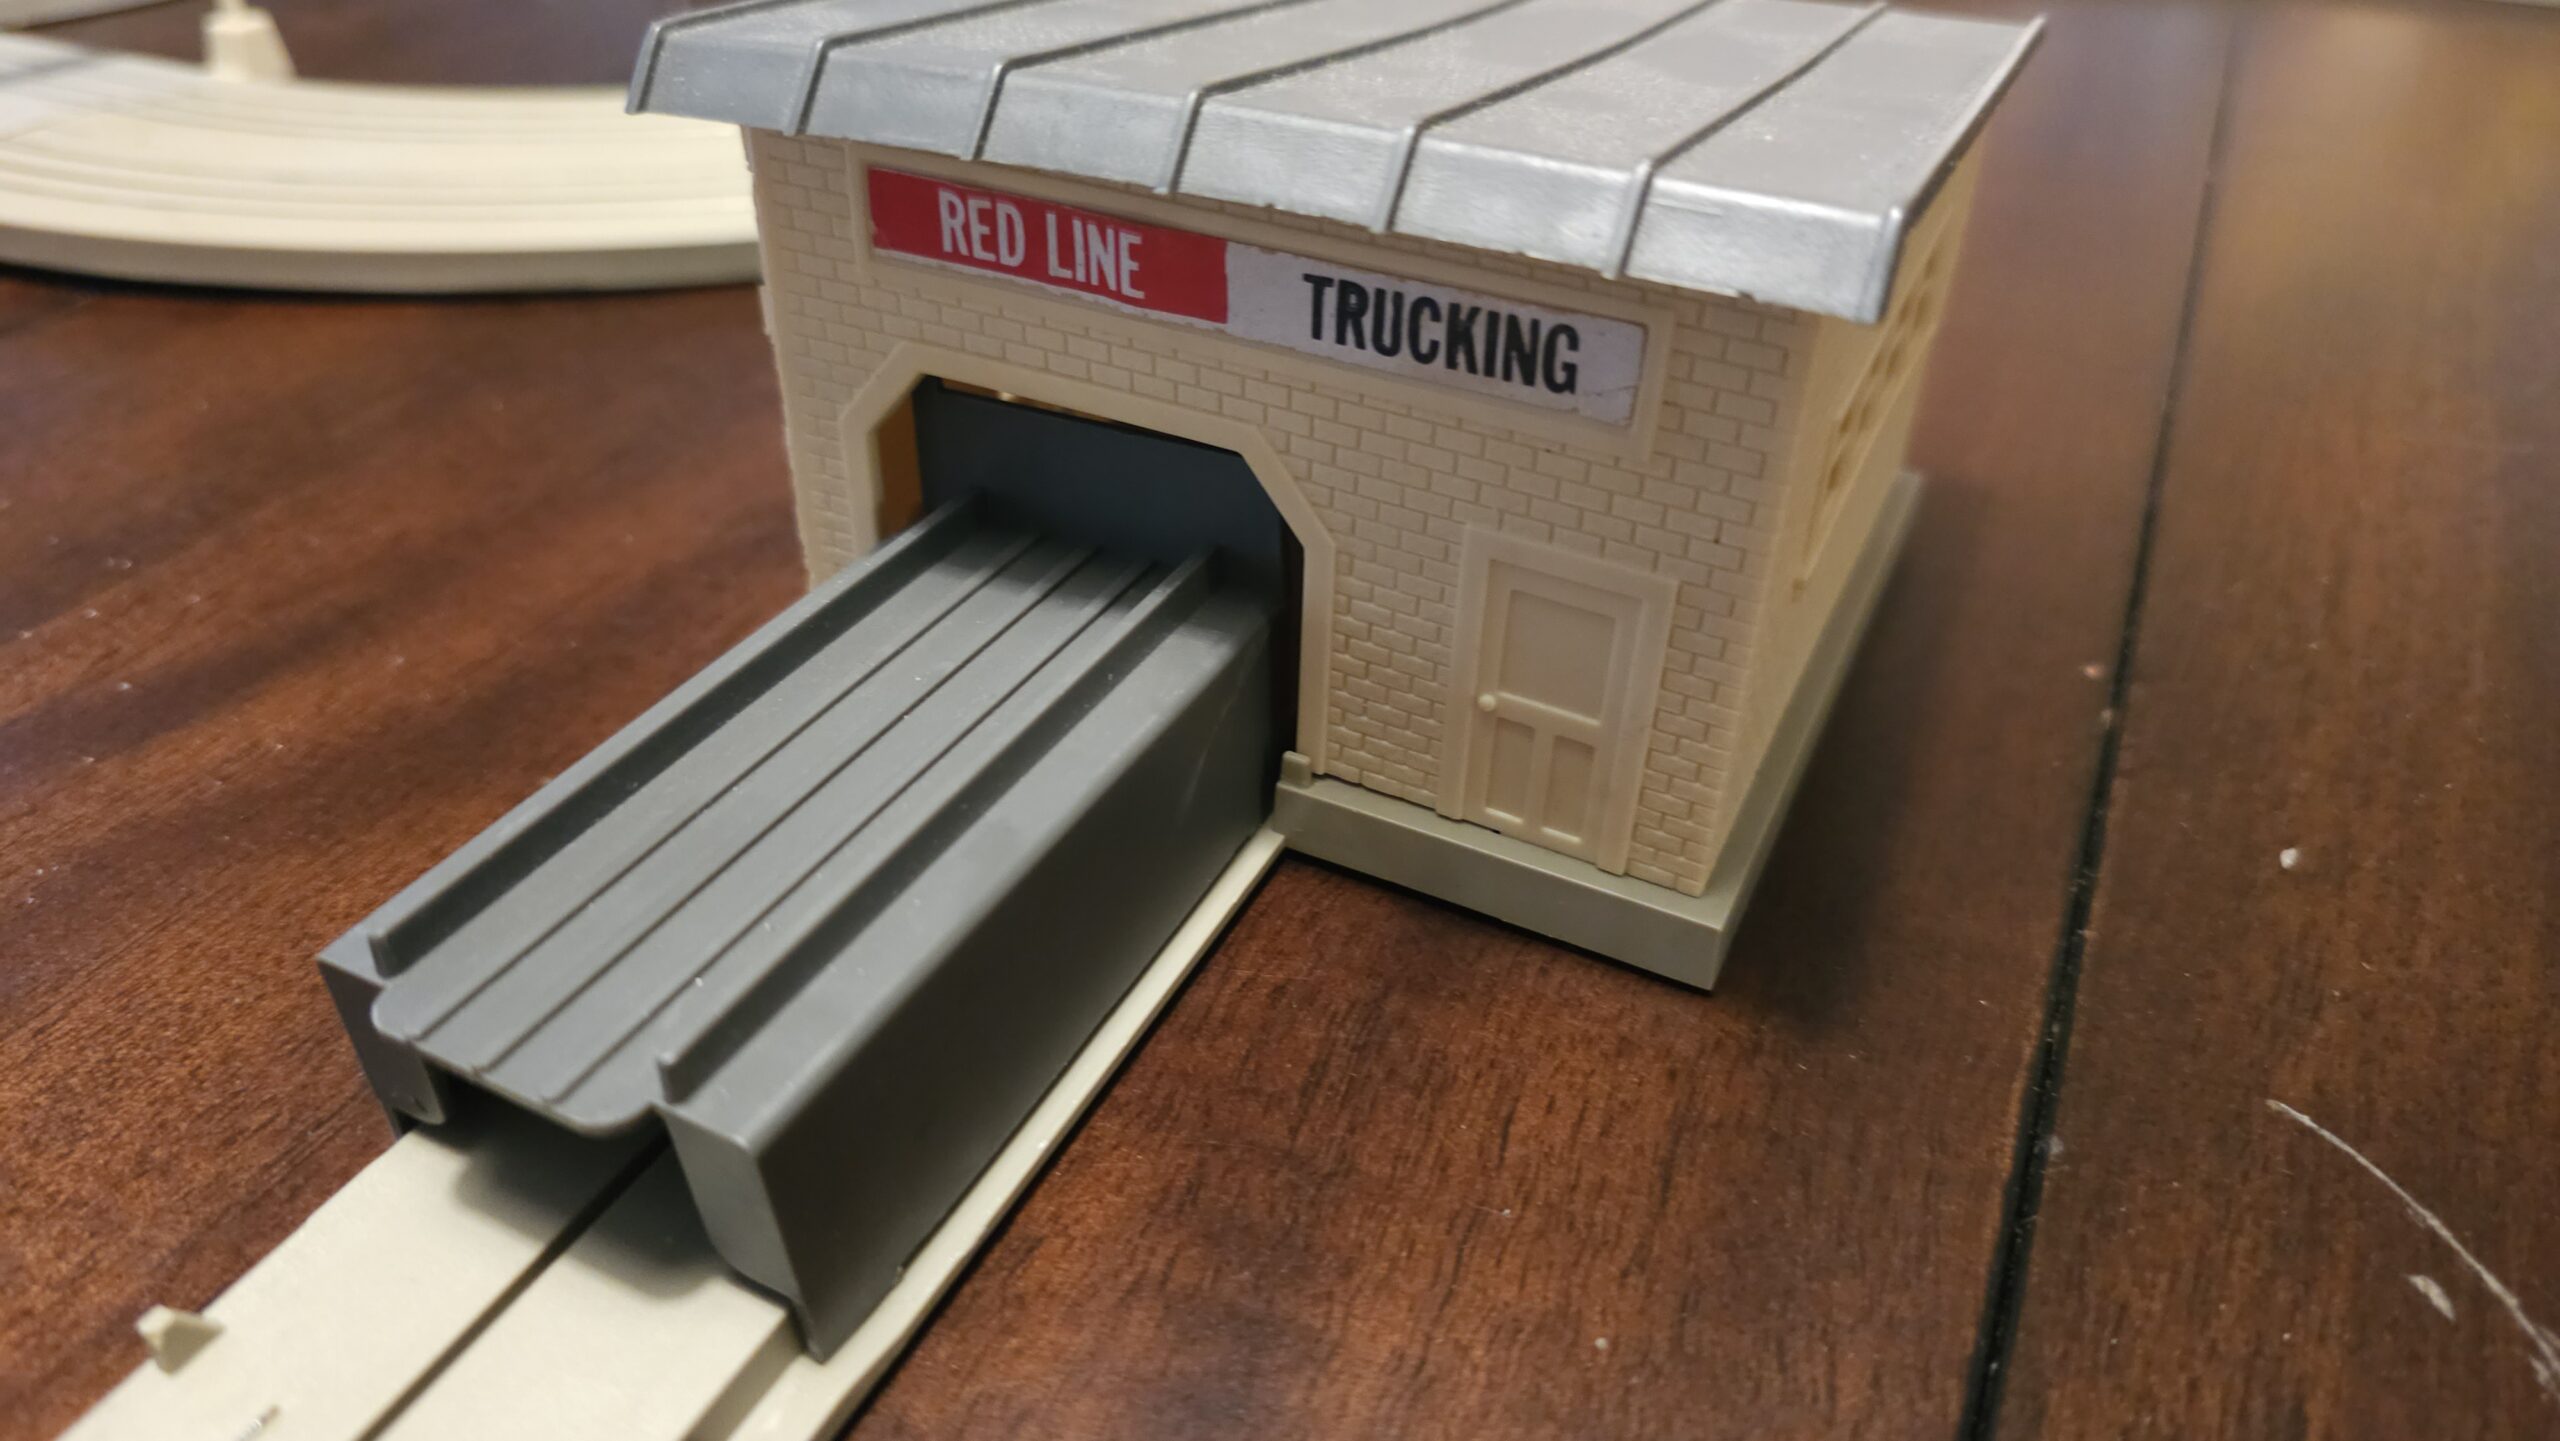 US1 Trucking Crate Loader